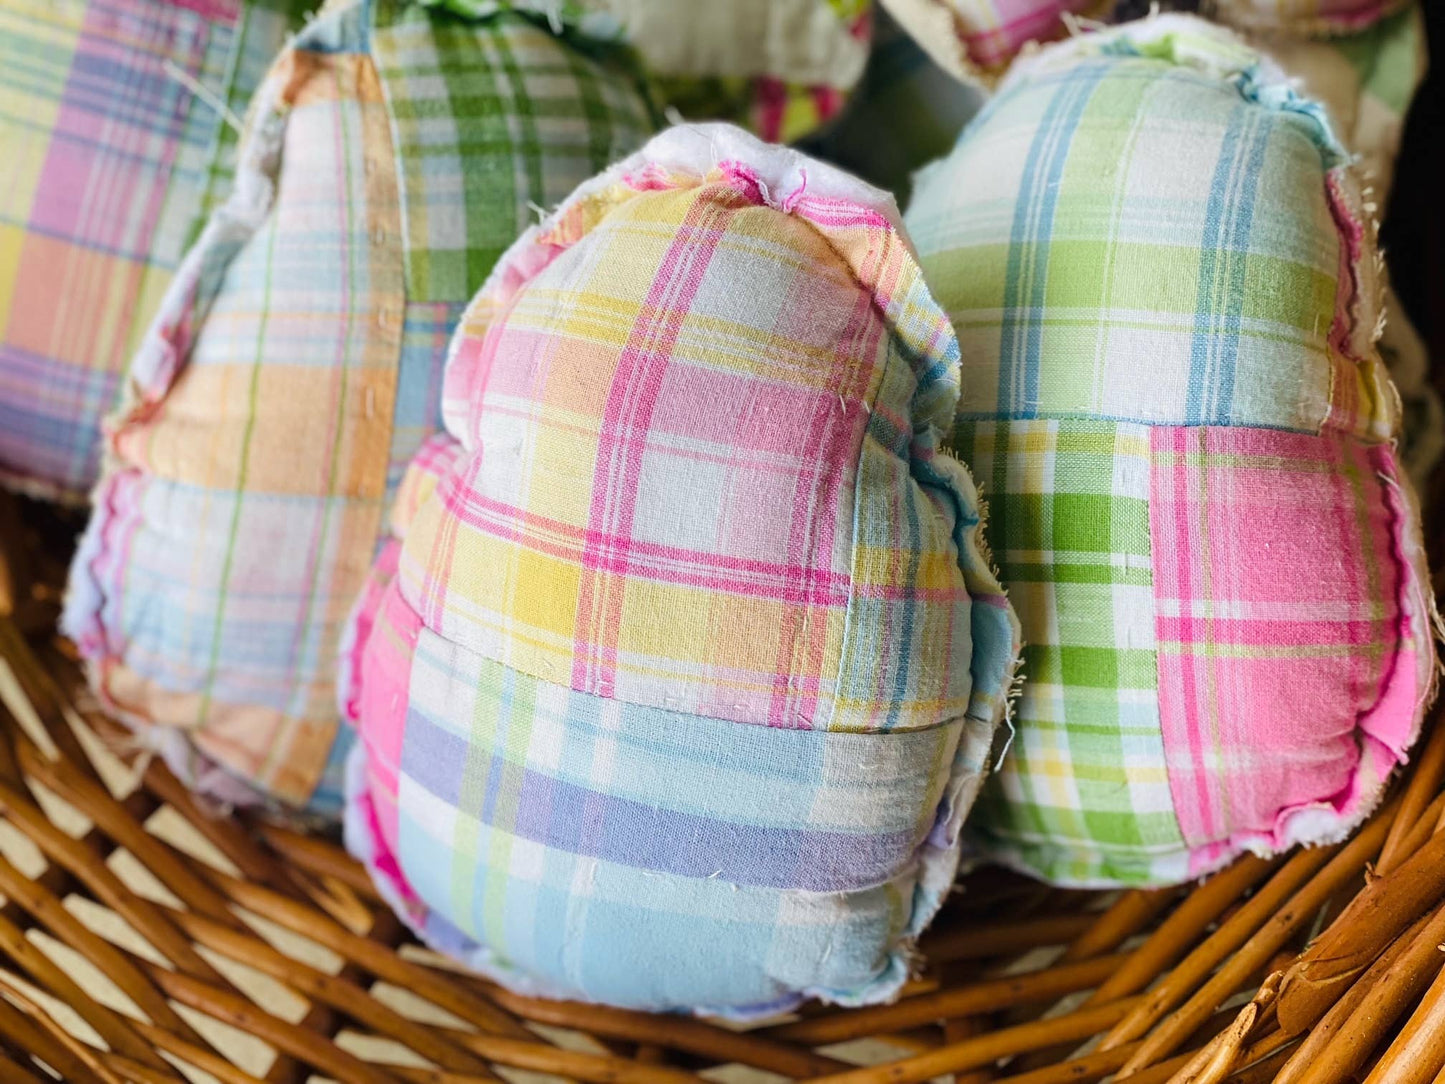 Vintage Fabric Easter Eggs made from upcycled quilts